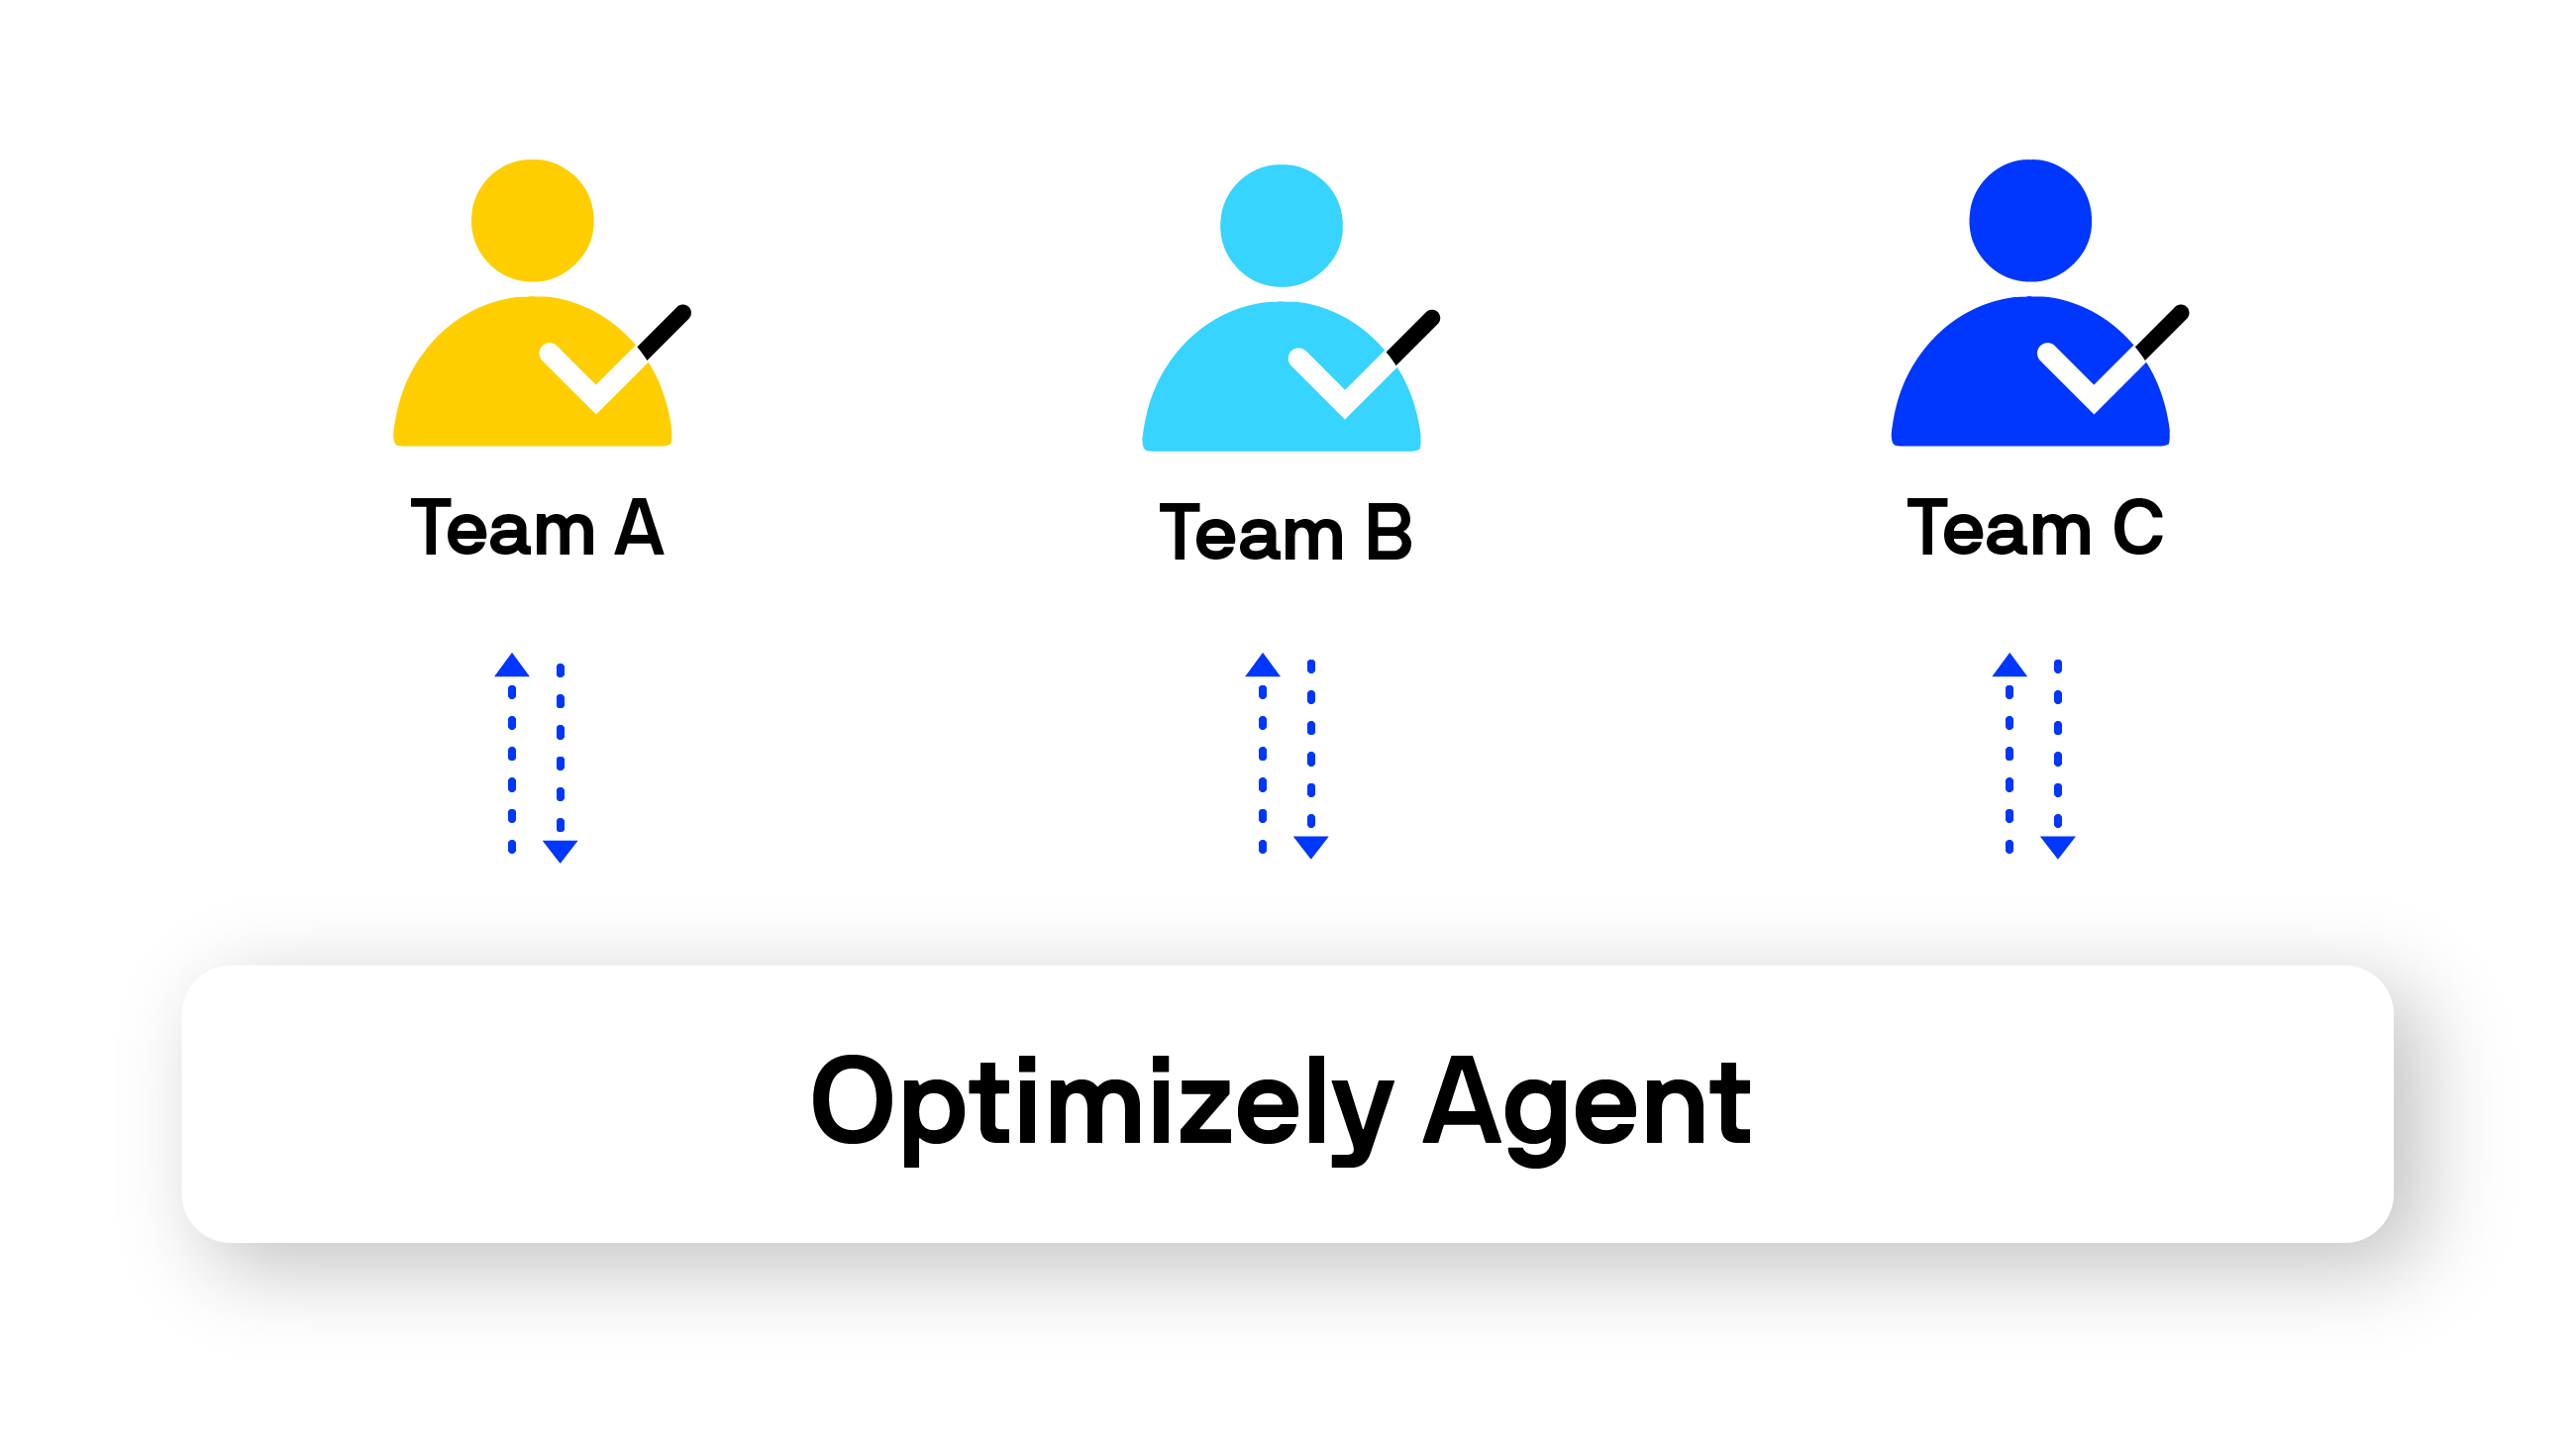 A diagram showing the central and standardized access to the Optimizely Agent service across an arbitrary number of teams.